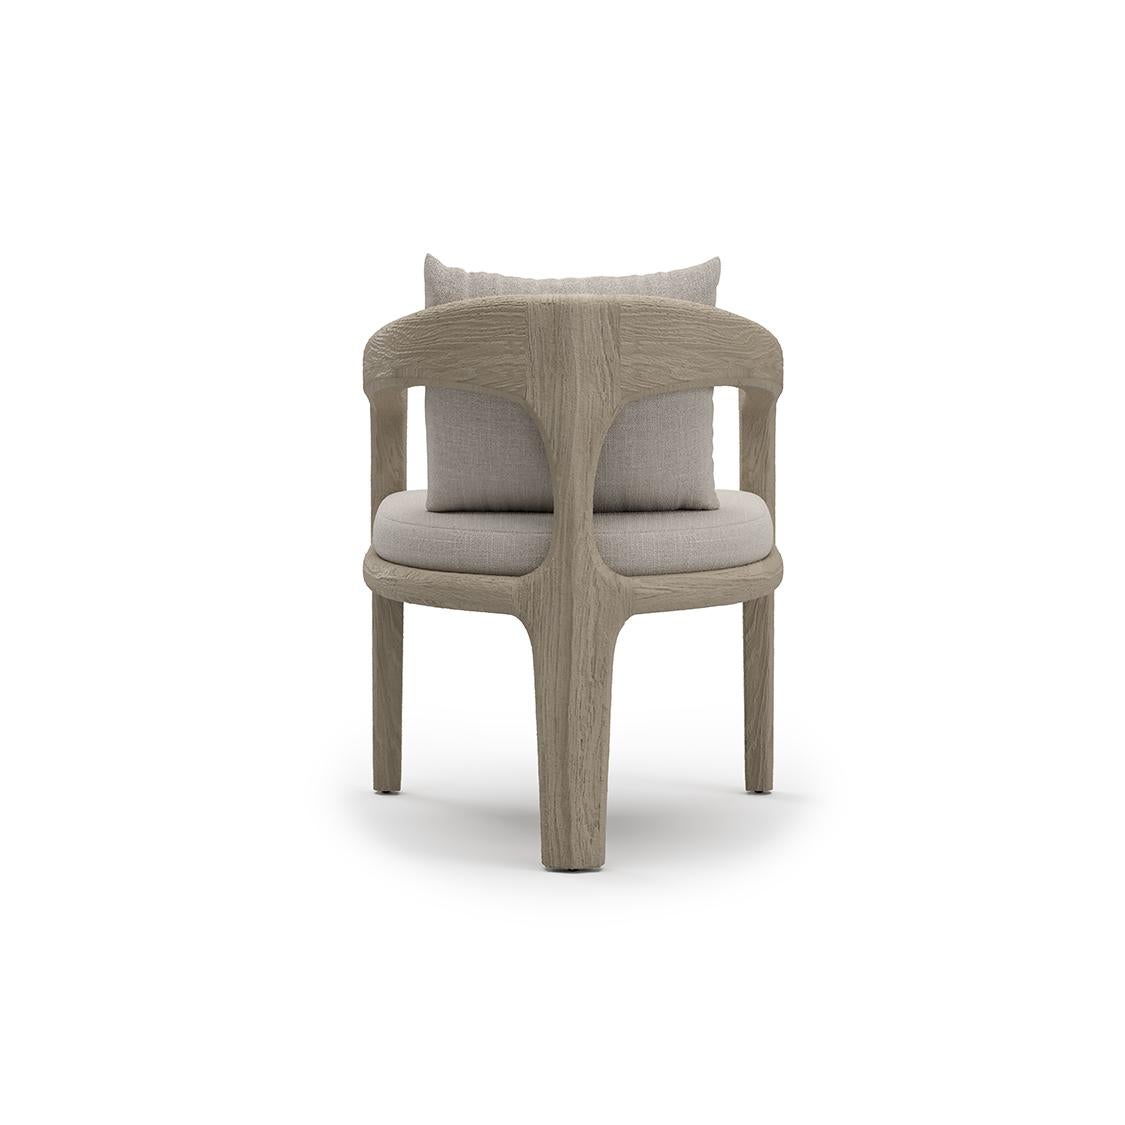 Hand-Crafted Whale-ash Outdoor Dining Chair by SNOC For Sale